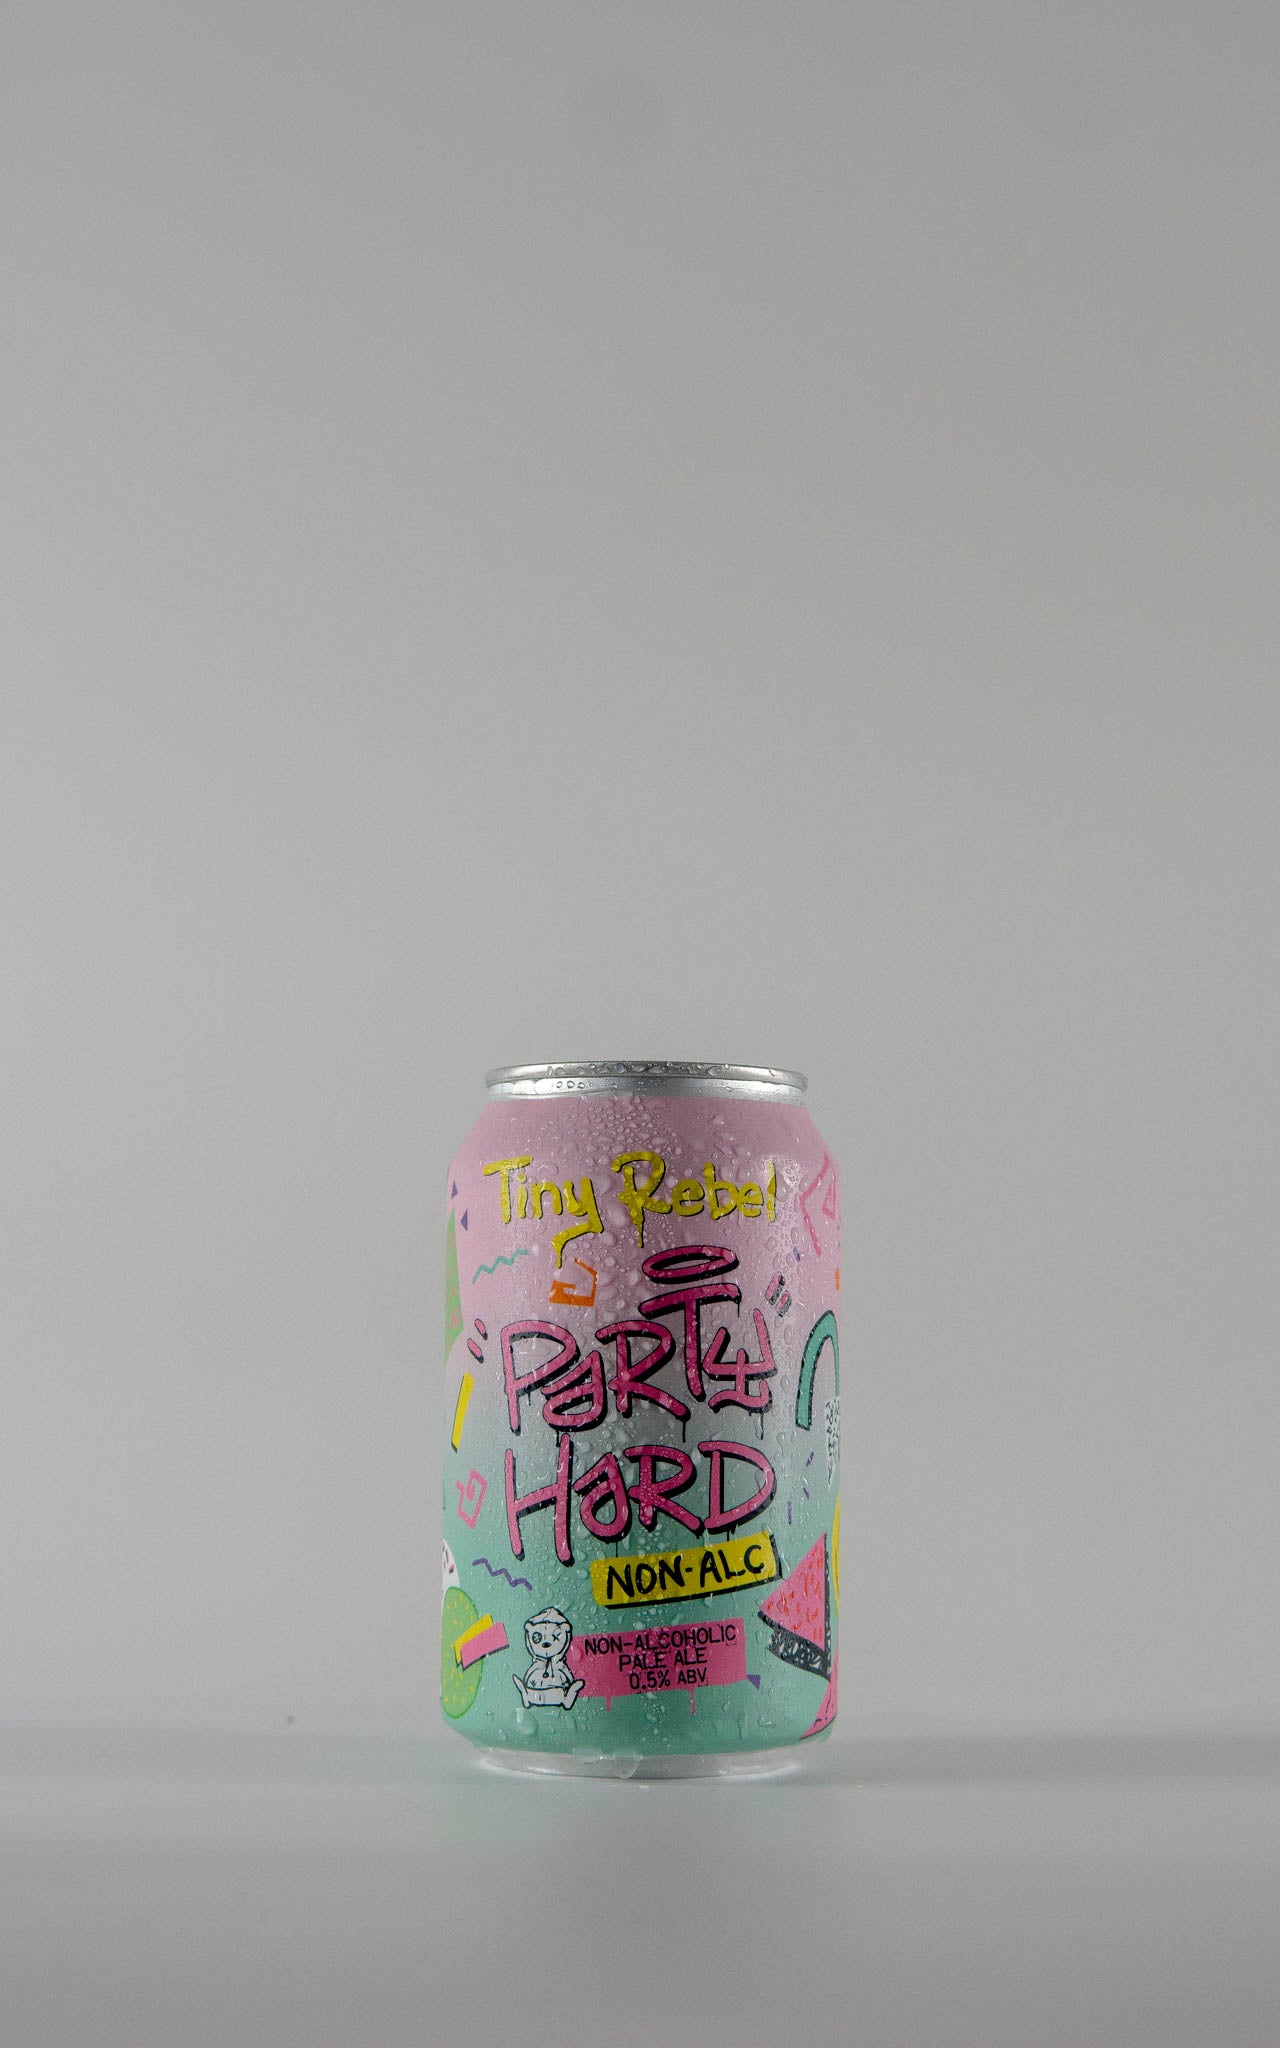 Tiny Rebel Party Hard Non Alcoholic Pale Ale 0.5% - 330ml